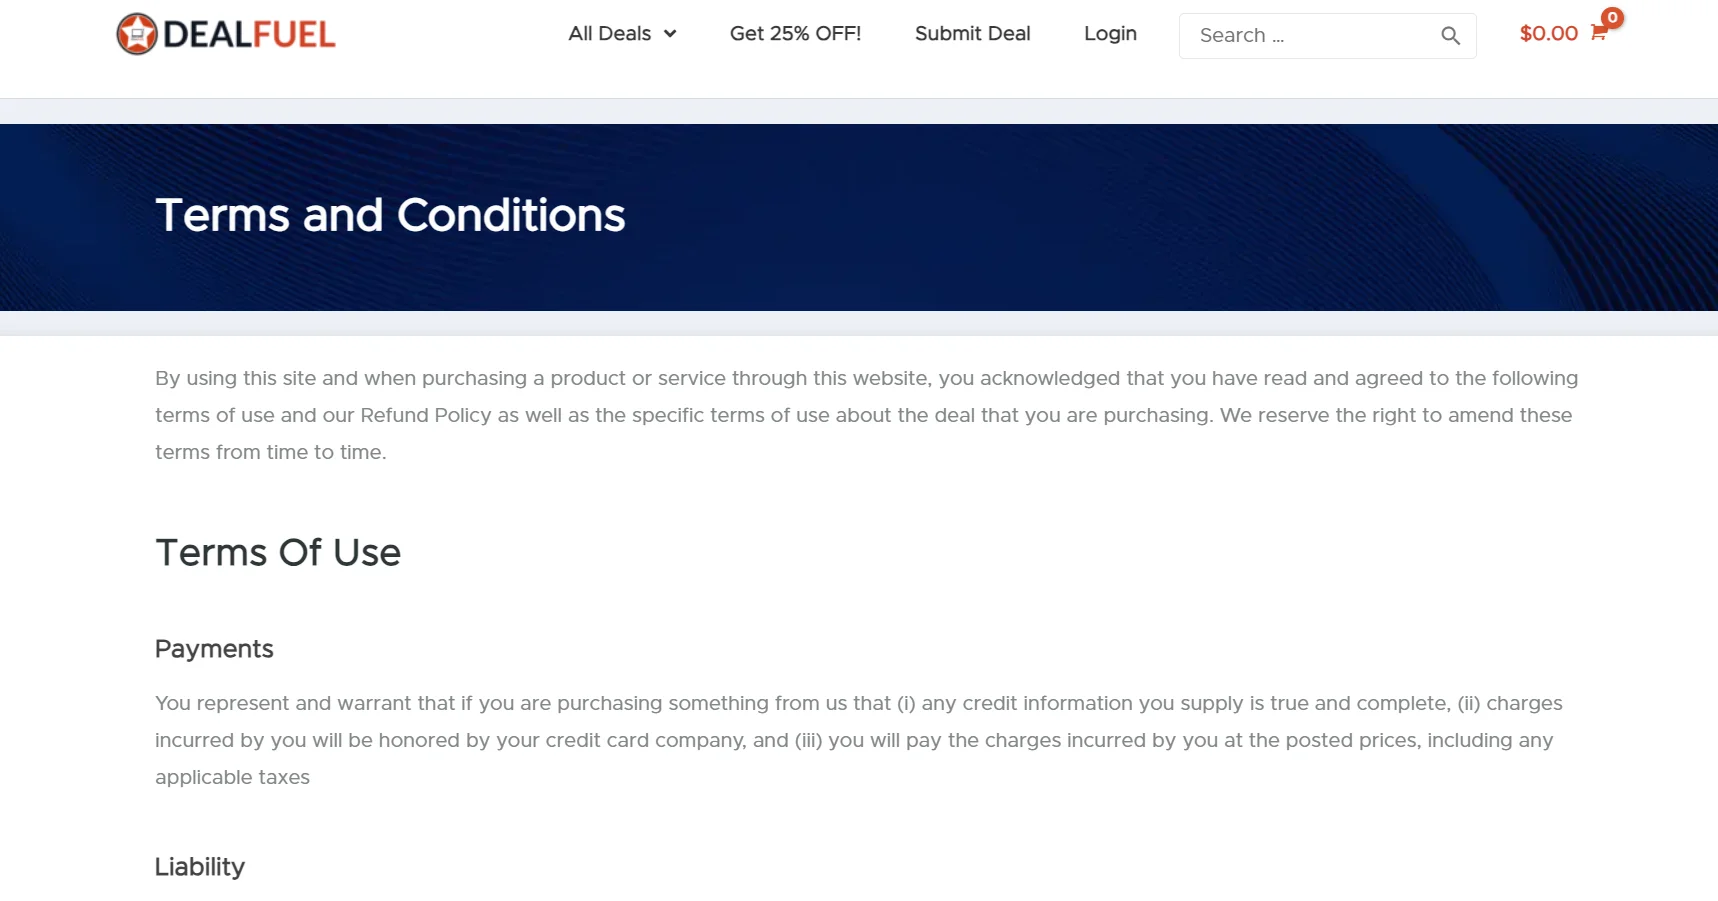 DealFuel's terms and conditions